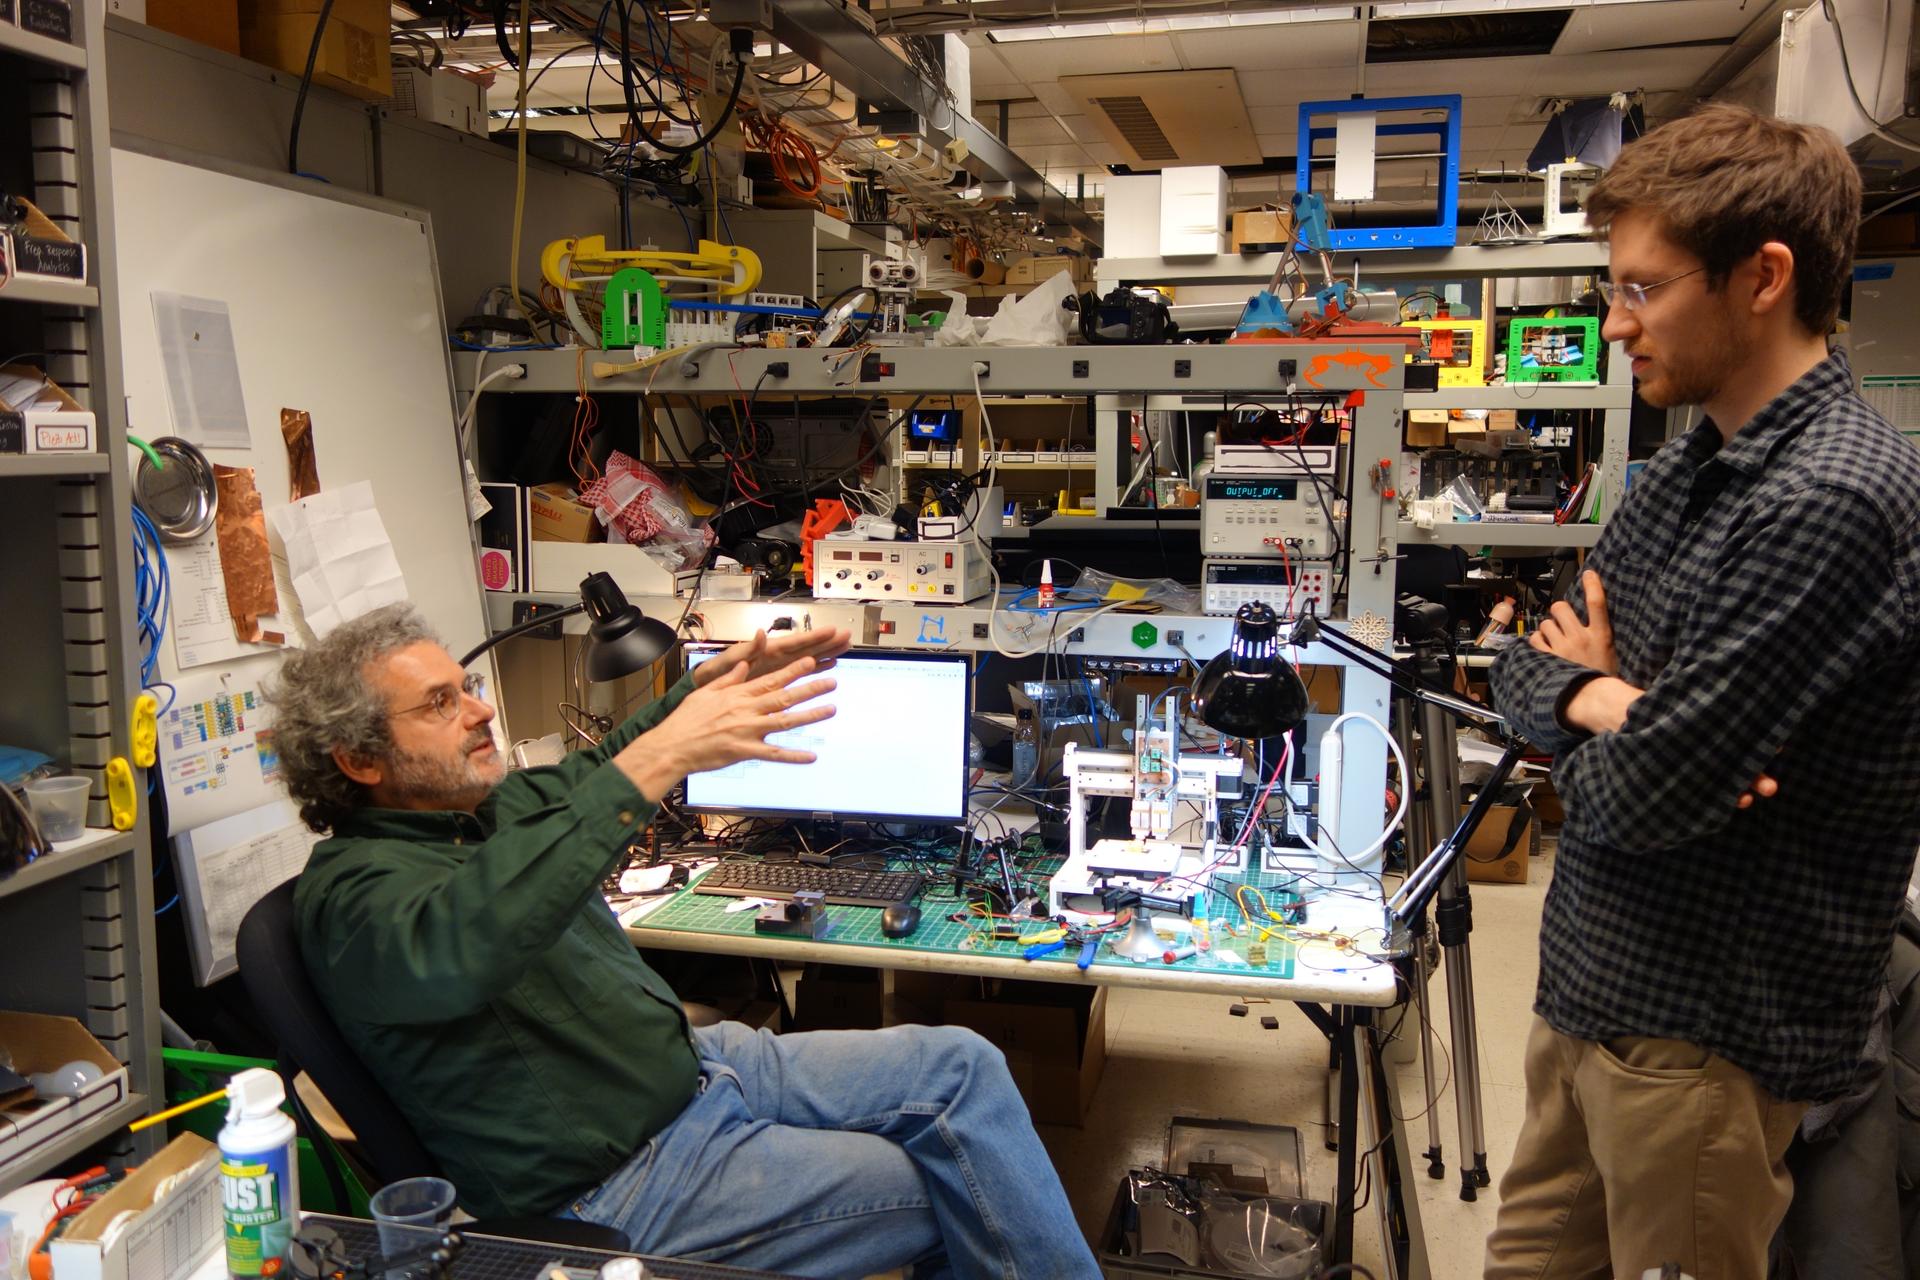 MIT professor Neil Gershenfeld, who directs the Center for Bits and Atoms and oversees the Fab Lab and Fab City movements, talks with PhD student Will Langford